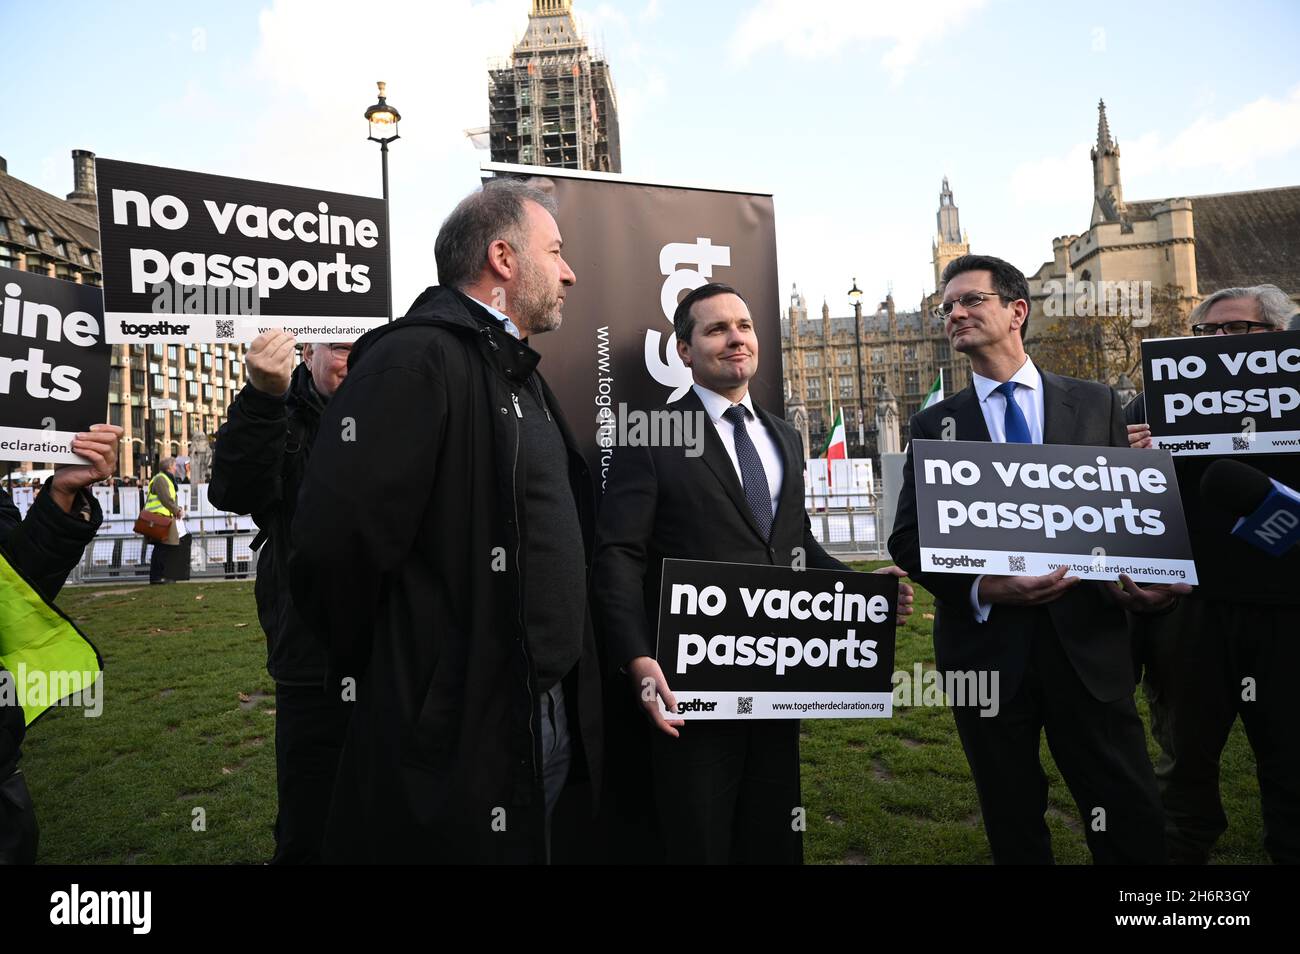 London, UK. 17 November 2021, Alan D Miller, Chris Green MP and Steve Baker MP support people should have Freedom of Choice against Vaccine Passports - No jab, no job, No jab, no travel is totall wrong against fundamental human rights in Parliament Square, 17 November 2021, London, UK. Stock Photo